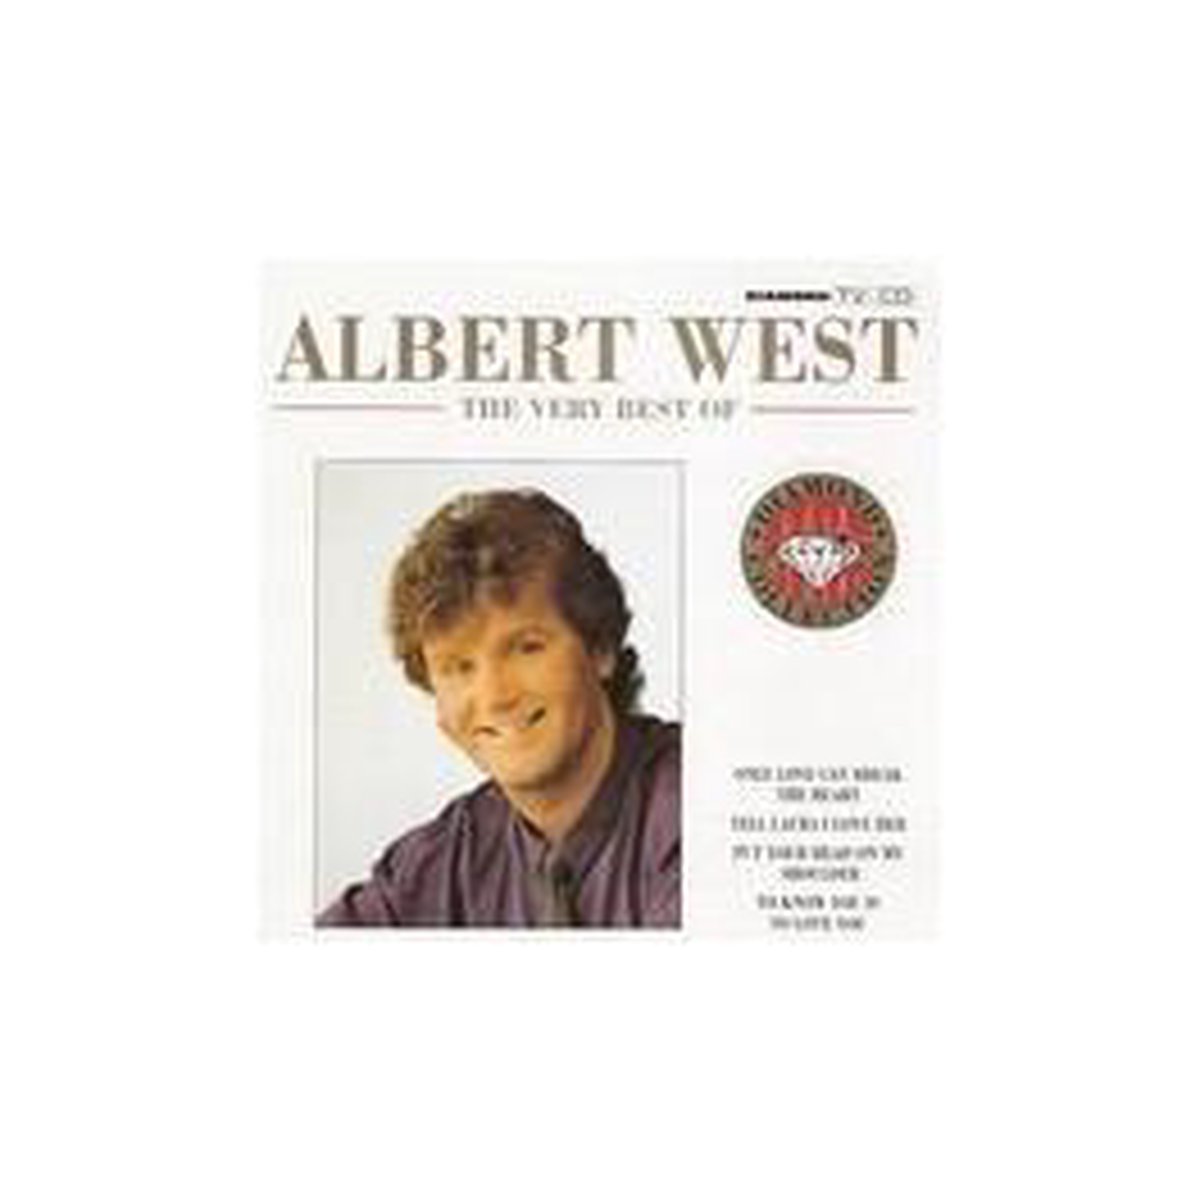 The very best of - Diamond star collection - Albert West